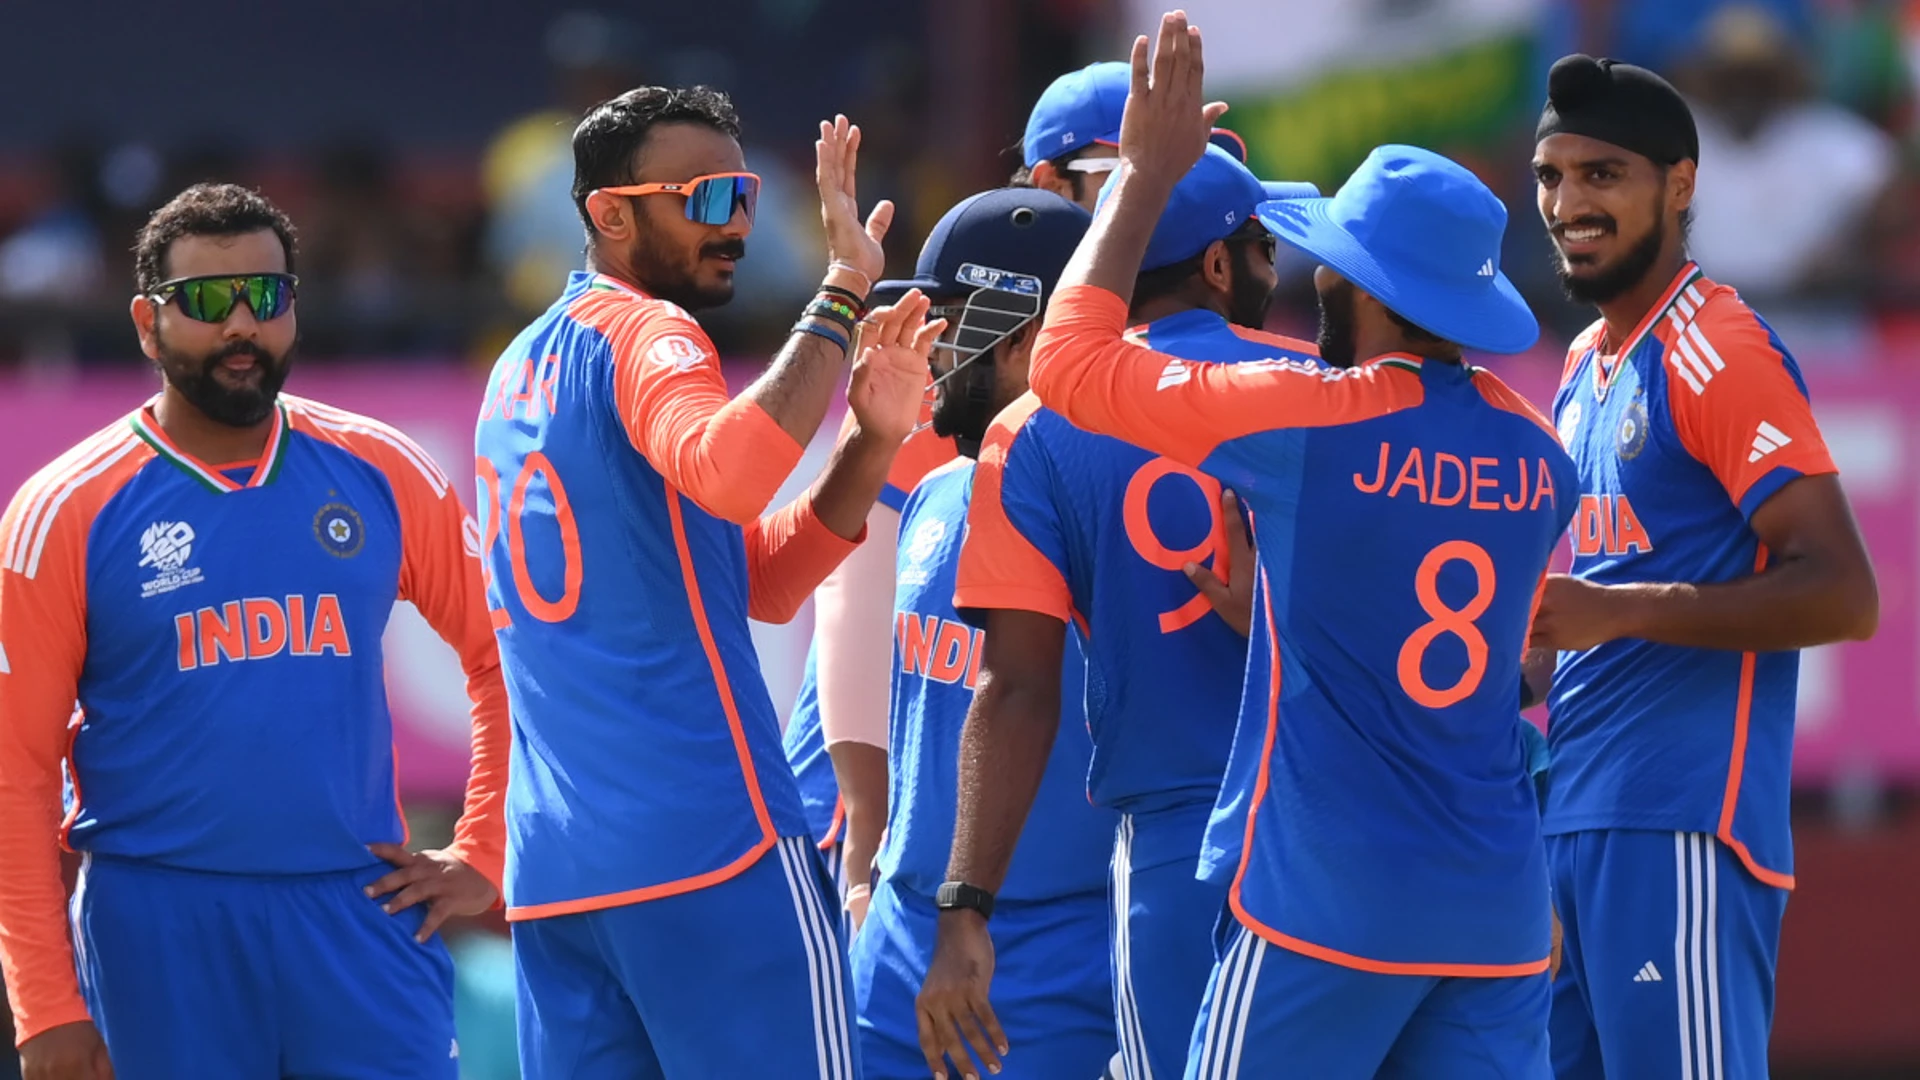 India rout England to set up T20 WC final with Proteas